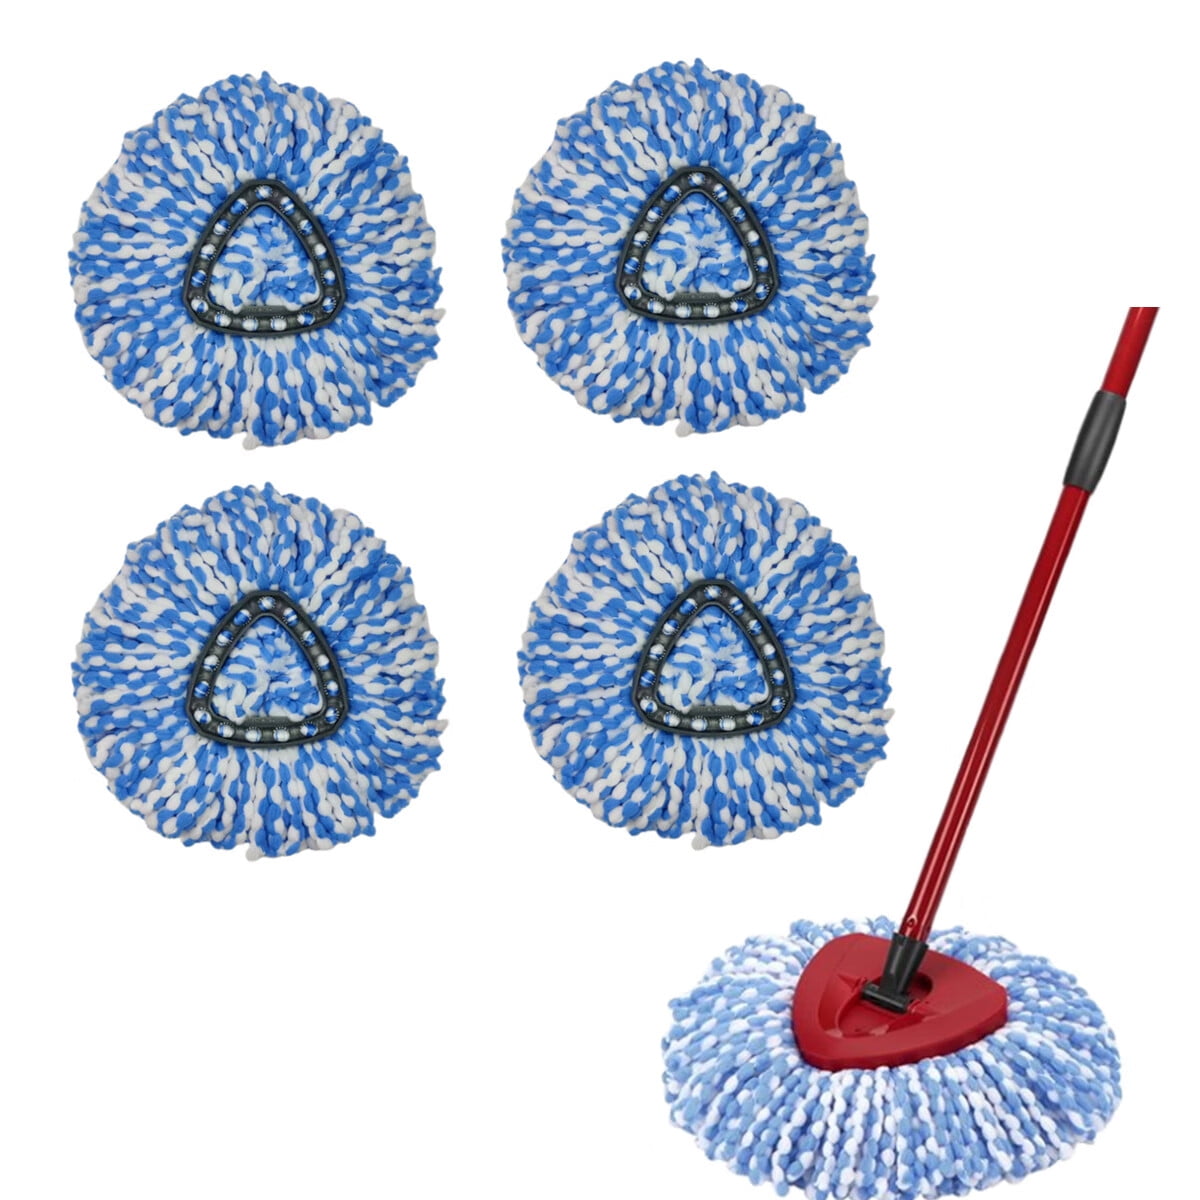 BLUTENET 4 Pack Rinse Clean Spin mop Replacement Head for 2-Tank System EasyWring Microfiber Spin Mop Refill New Blue 